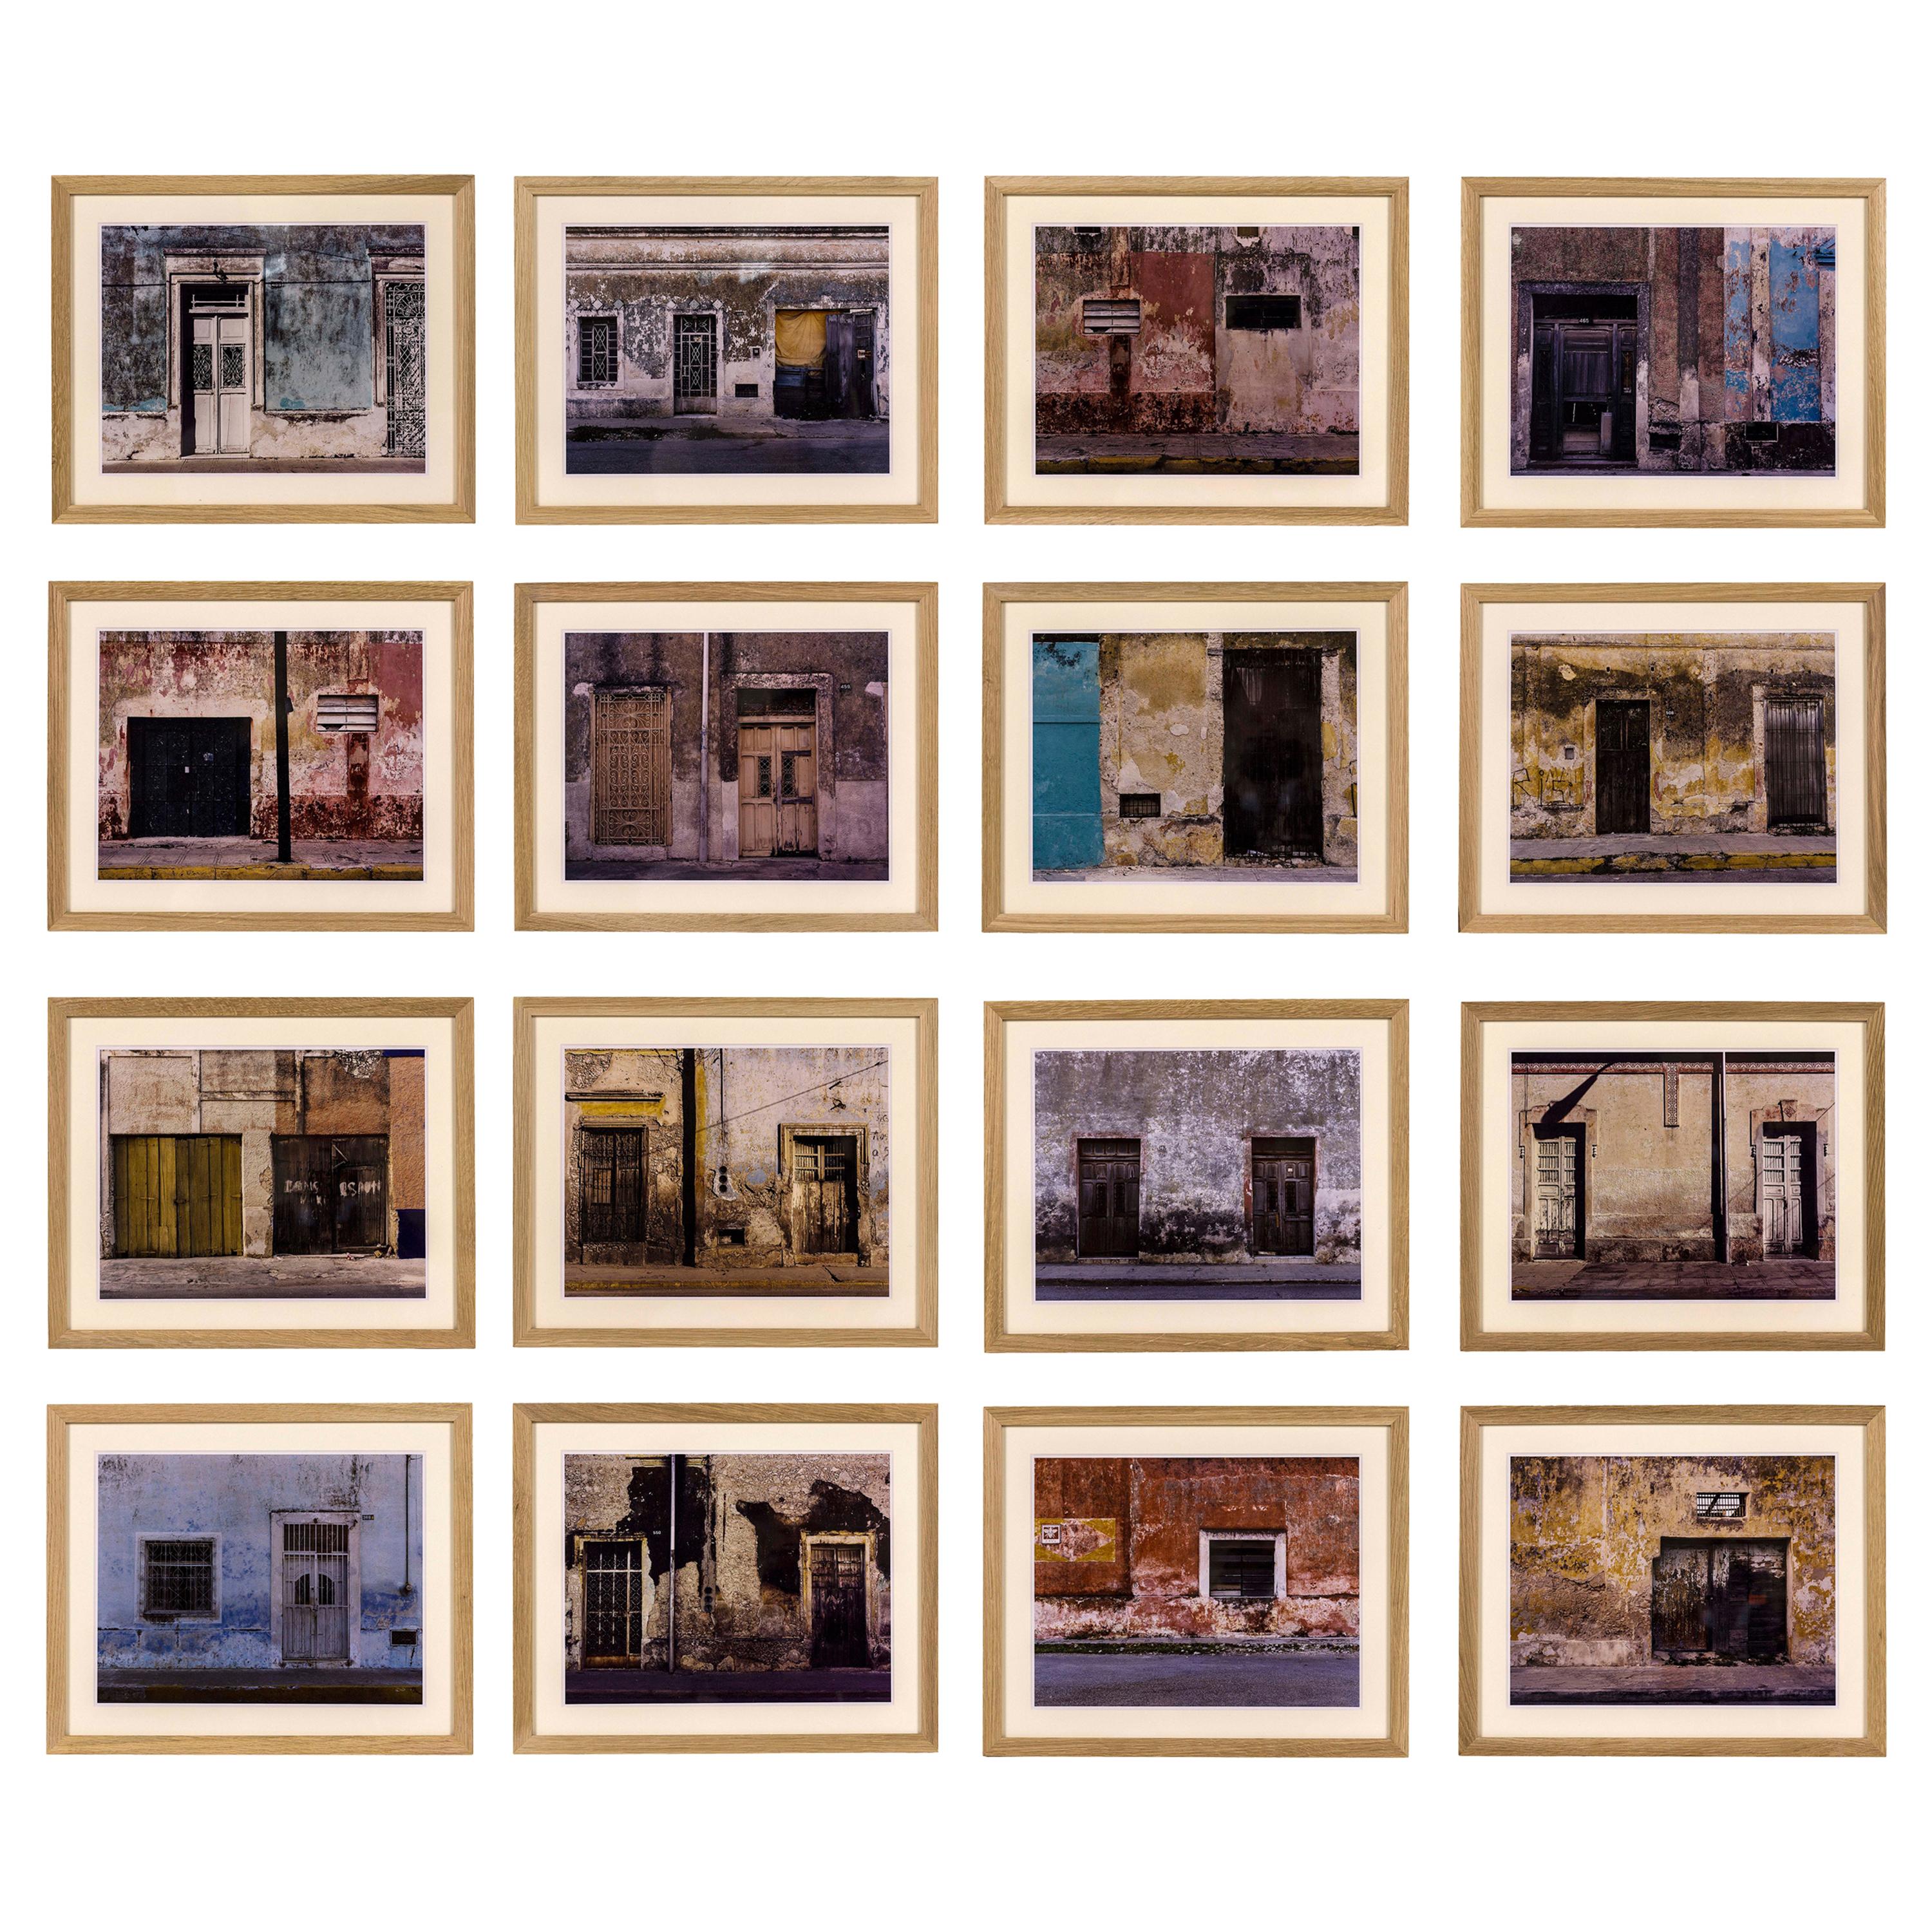 "Merida", Series of 16 Photographs by Sean Scully, circa 2001, Mexico For Sale